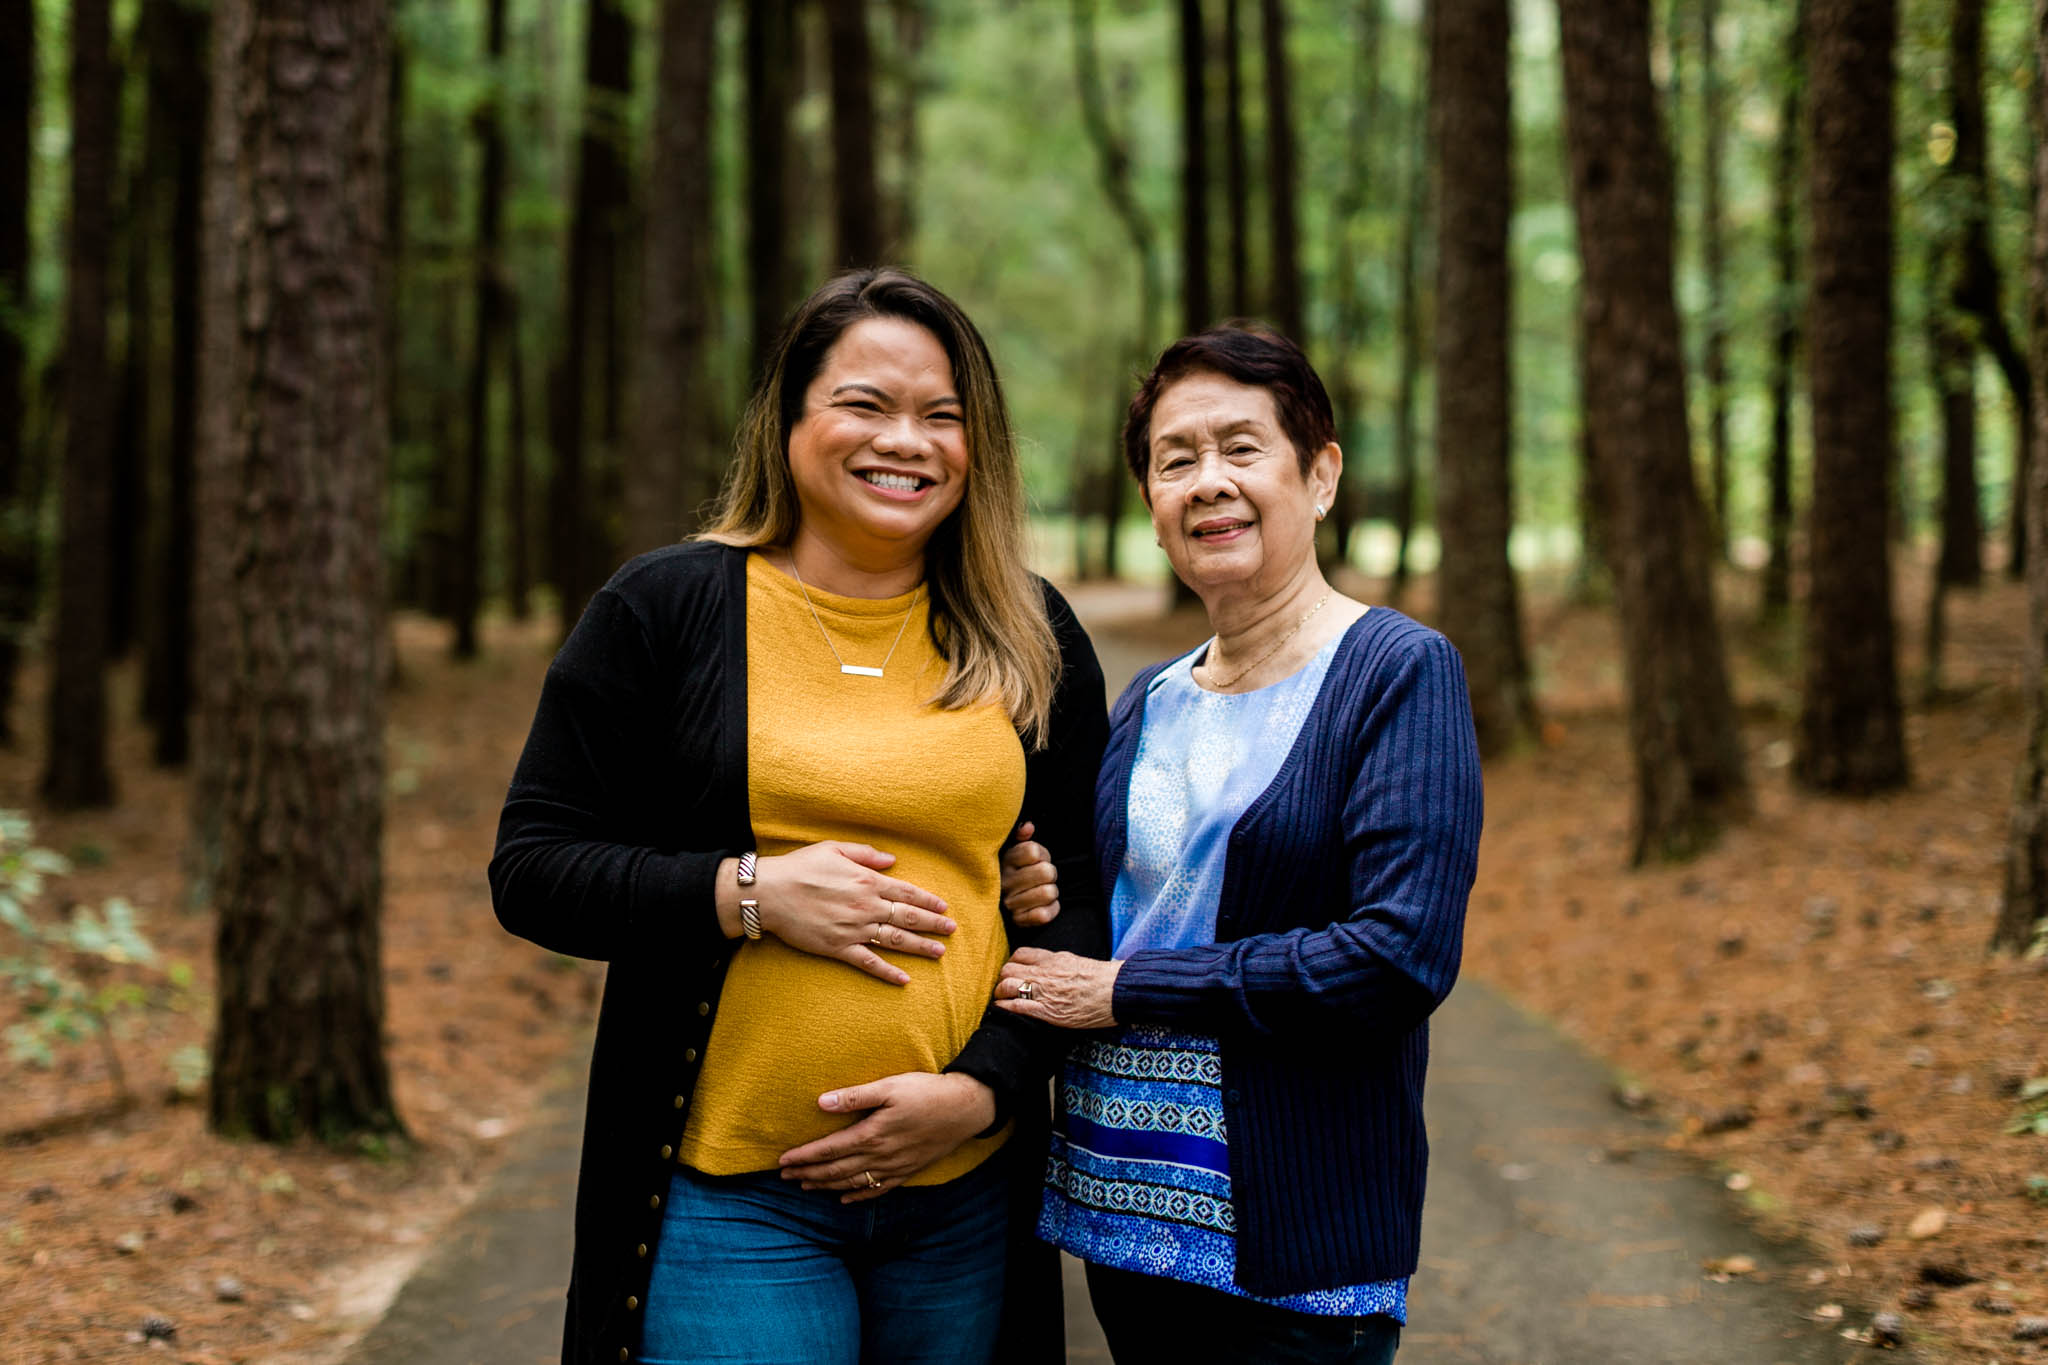 Raleigh Newborn Photographer | By G. Lin Photography | Grandma and granddaughter portrait at Umstead Park